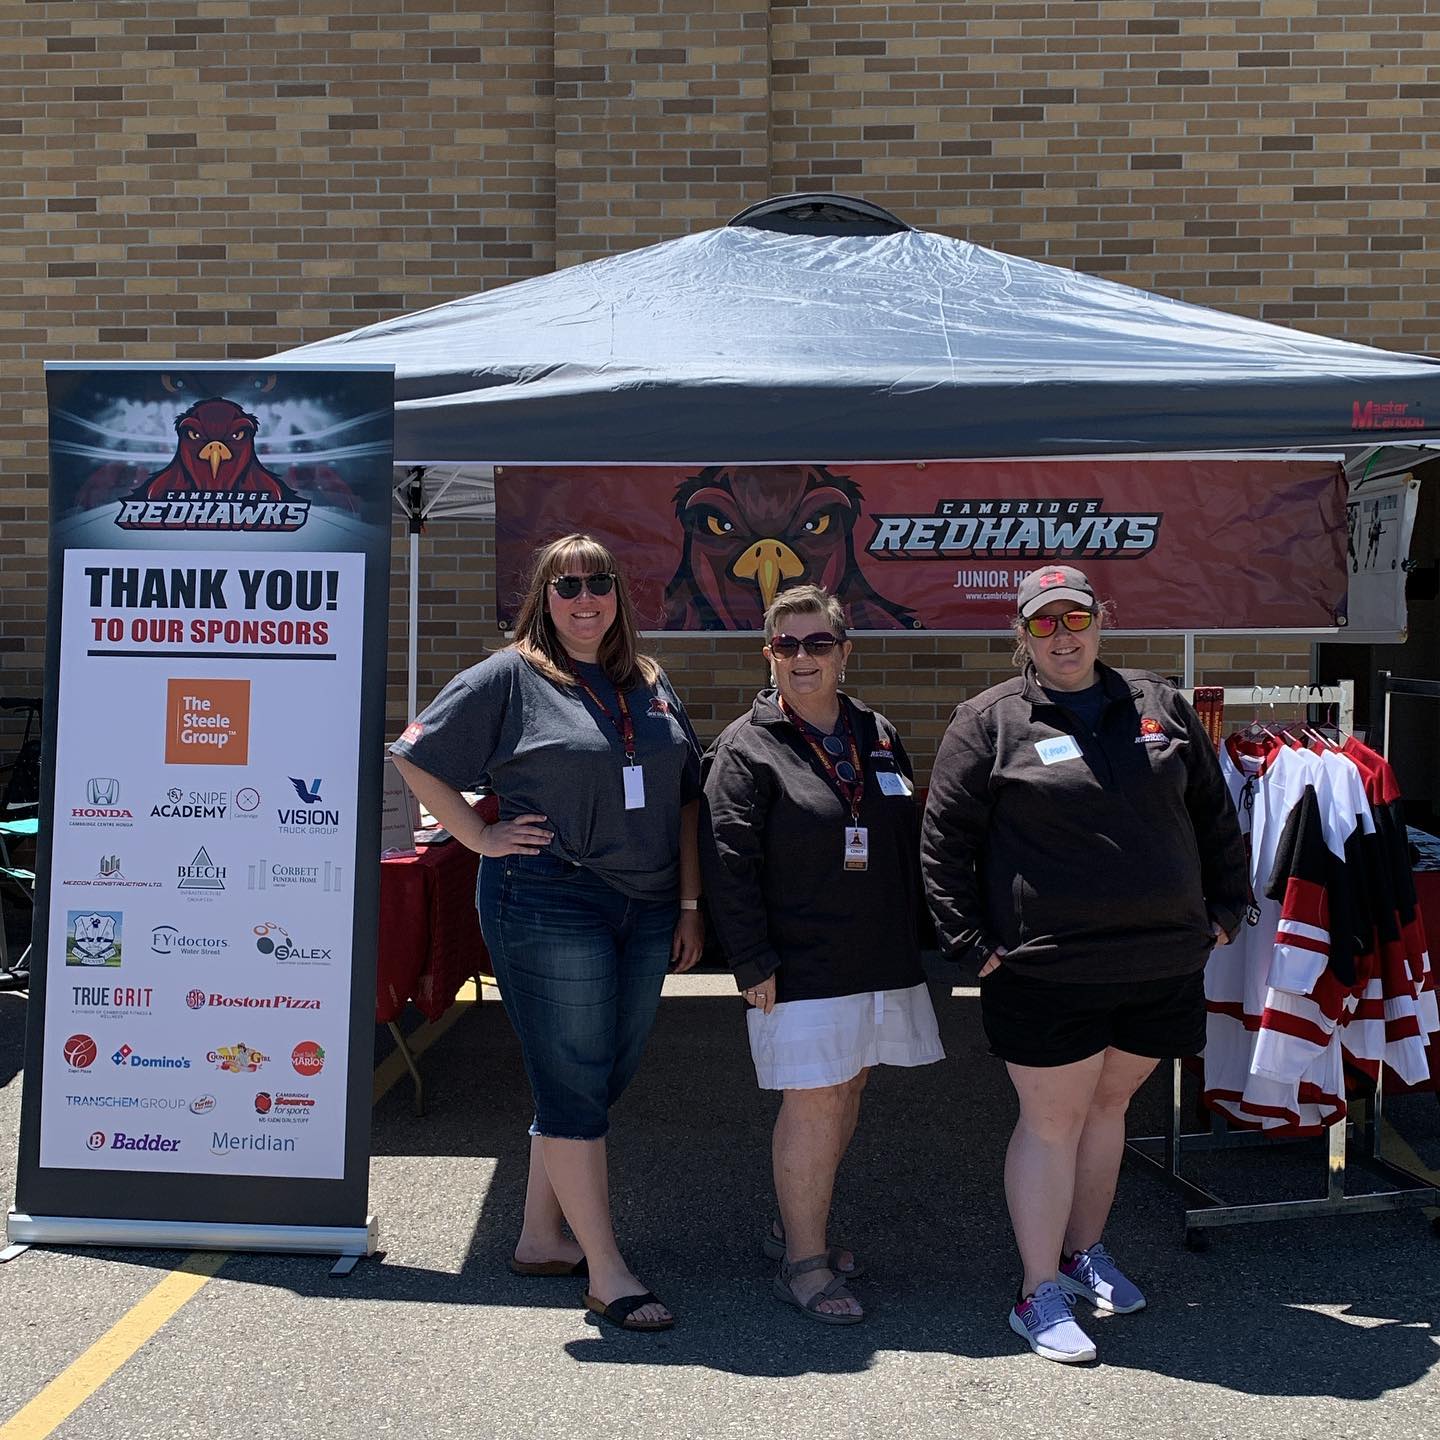 Come out and visit us today from 1-5 at the Galt Arena Gardens tonight to celebrate the 100th Anniversary! 

We’ve got merch, draws and season tickets to sell today! 🏒